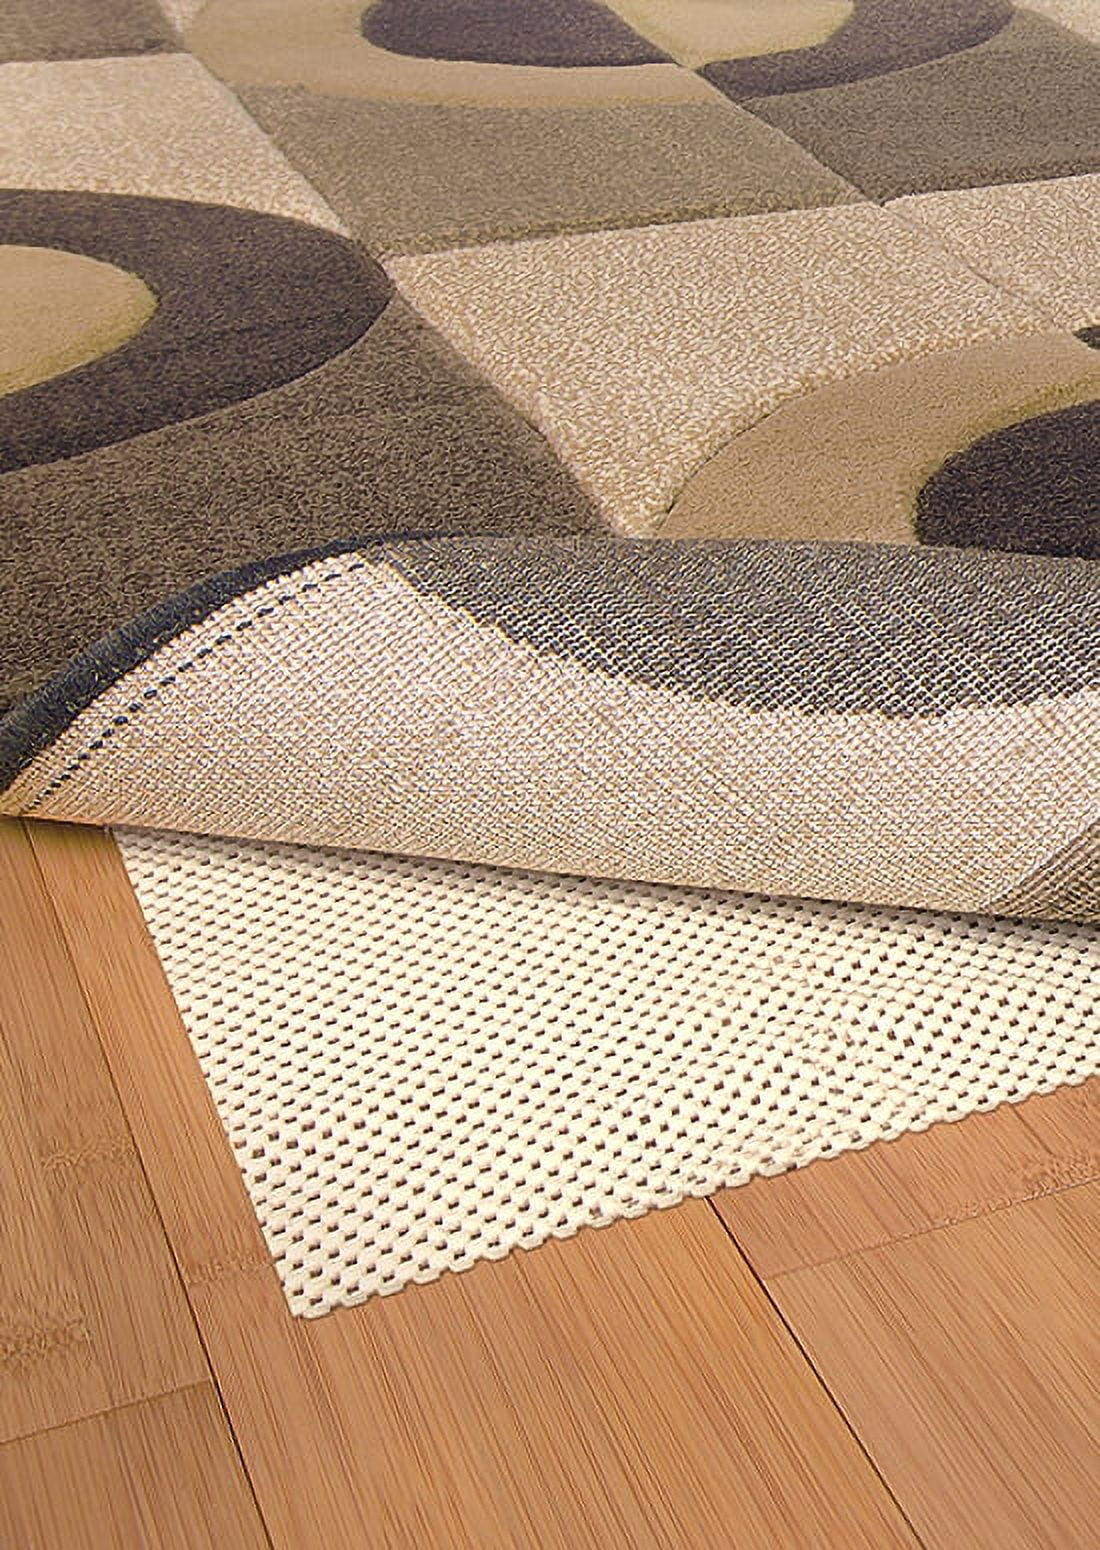 Grip-It Cushioned Non-Slip Rug Pad for Rugs on Hard Surface Floors, 4 by 6-Feet